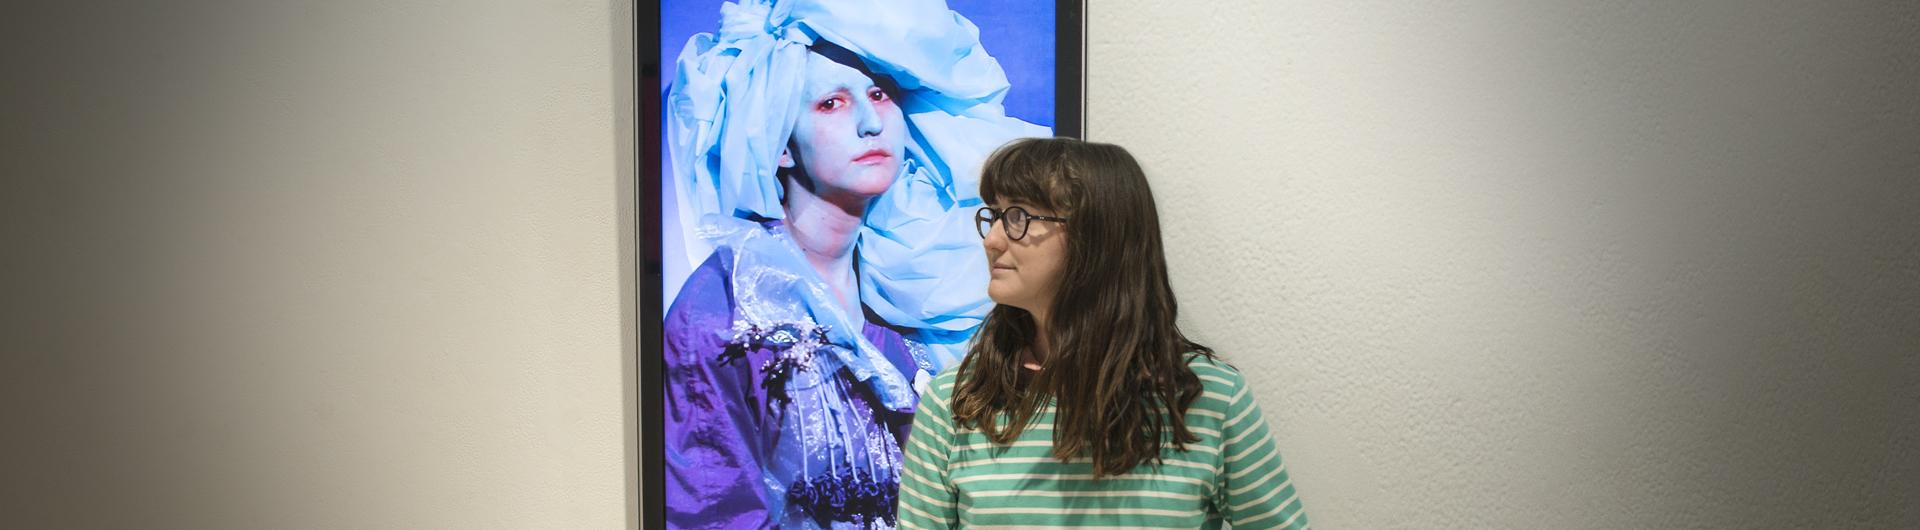 Sculpture student Juliet Johnson poses in front of her digital art project featuring herself titled “PINKEYE.” Photo by Joseph Philipson.